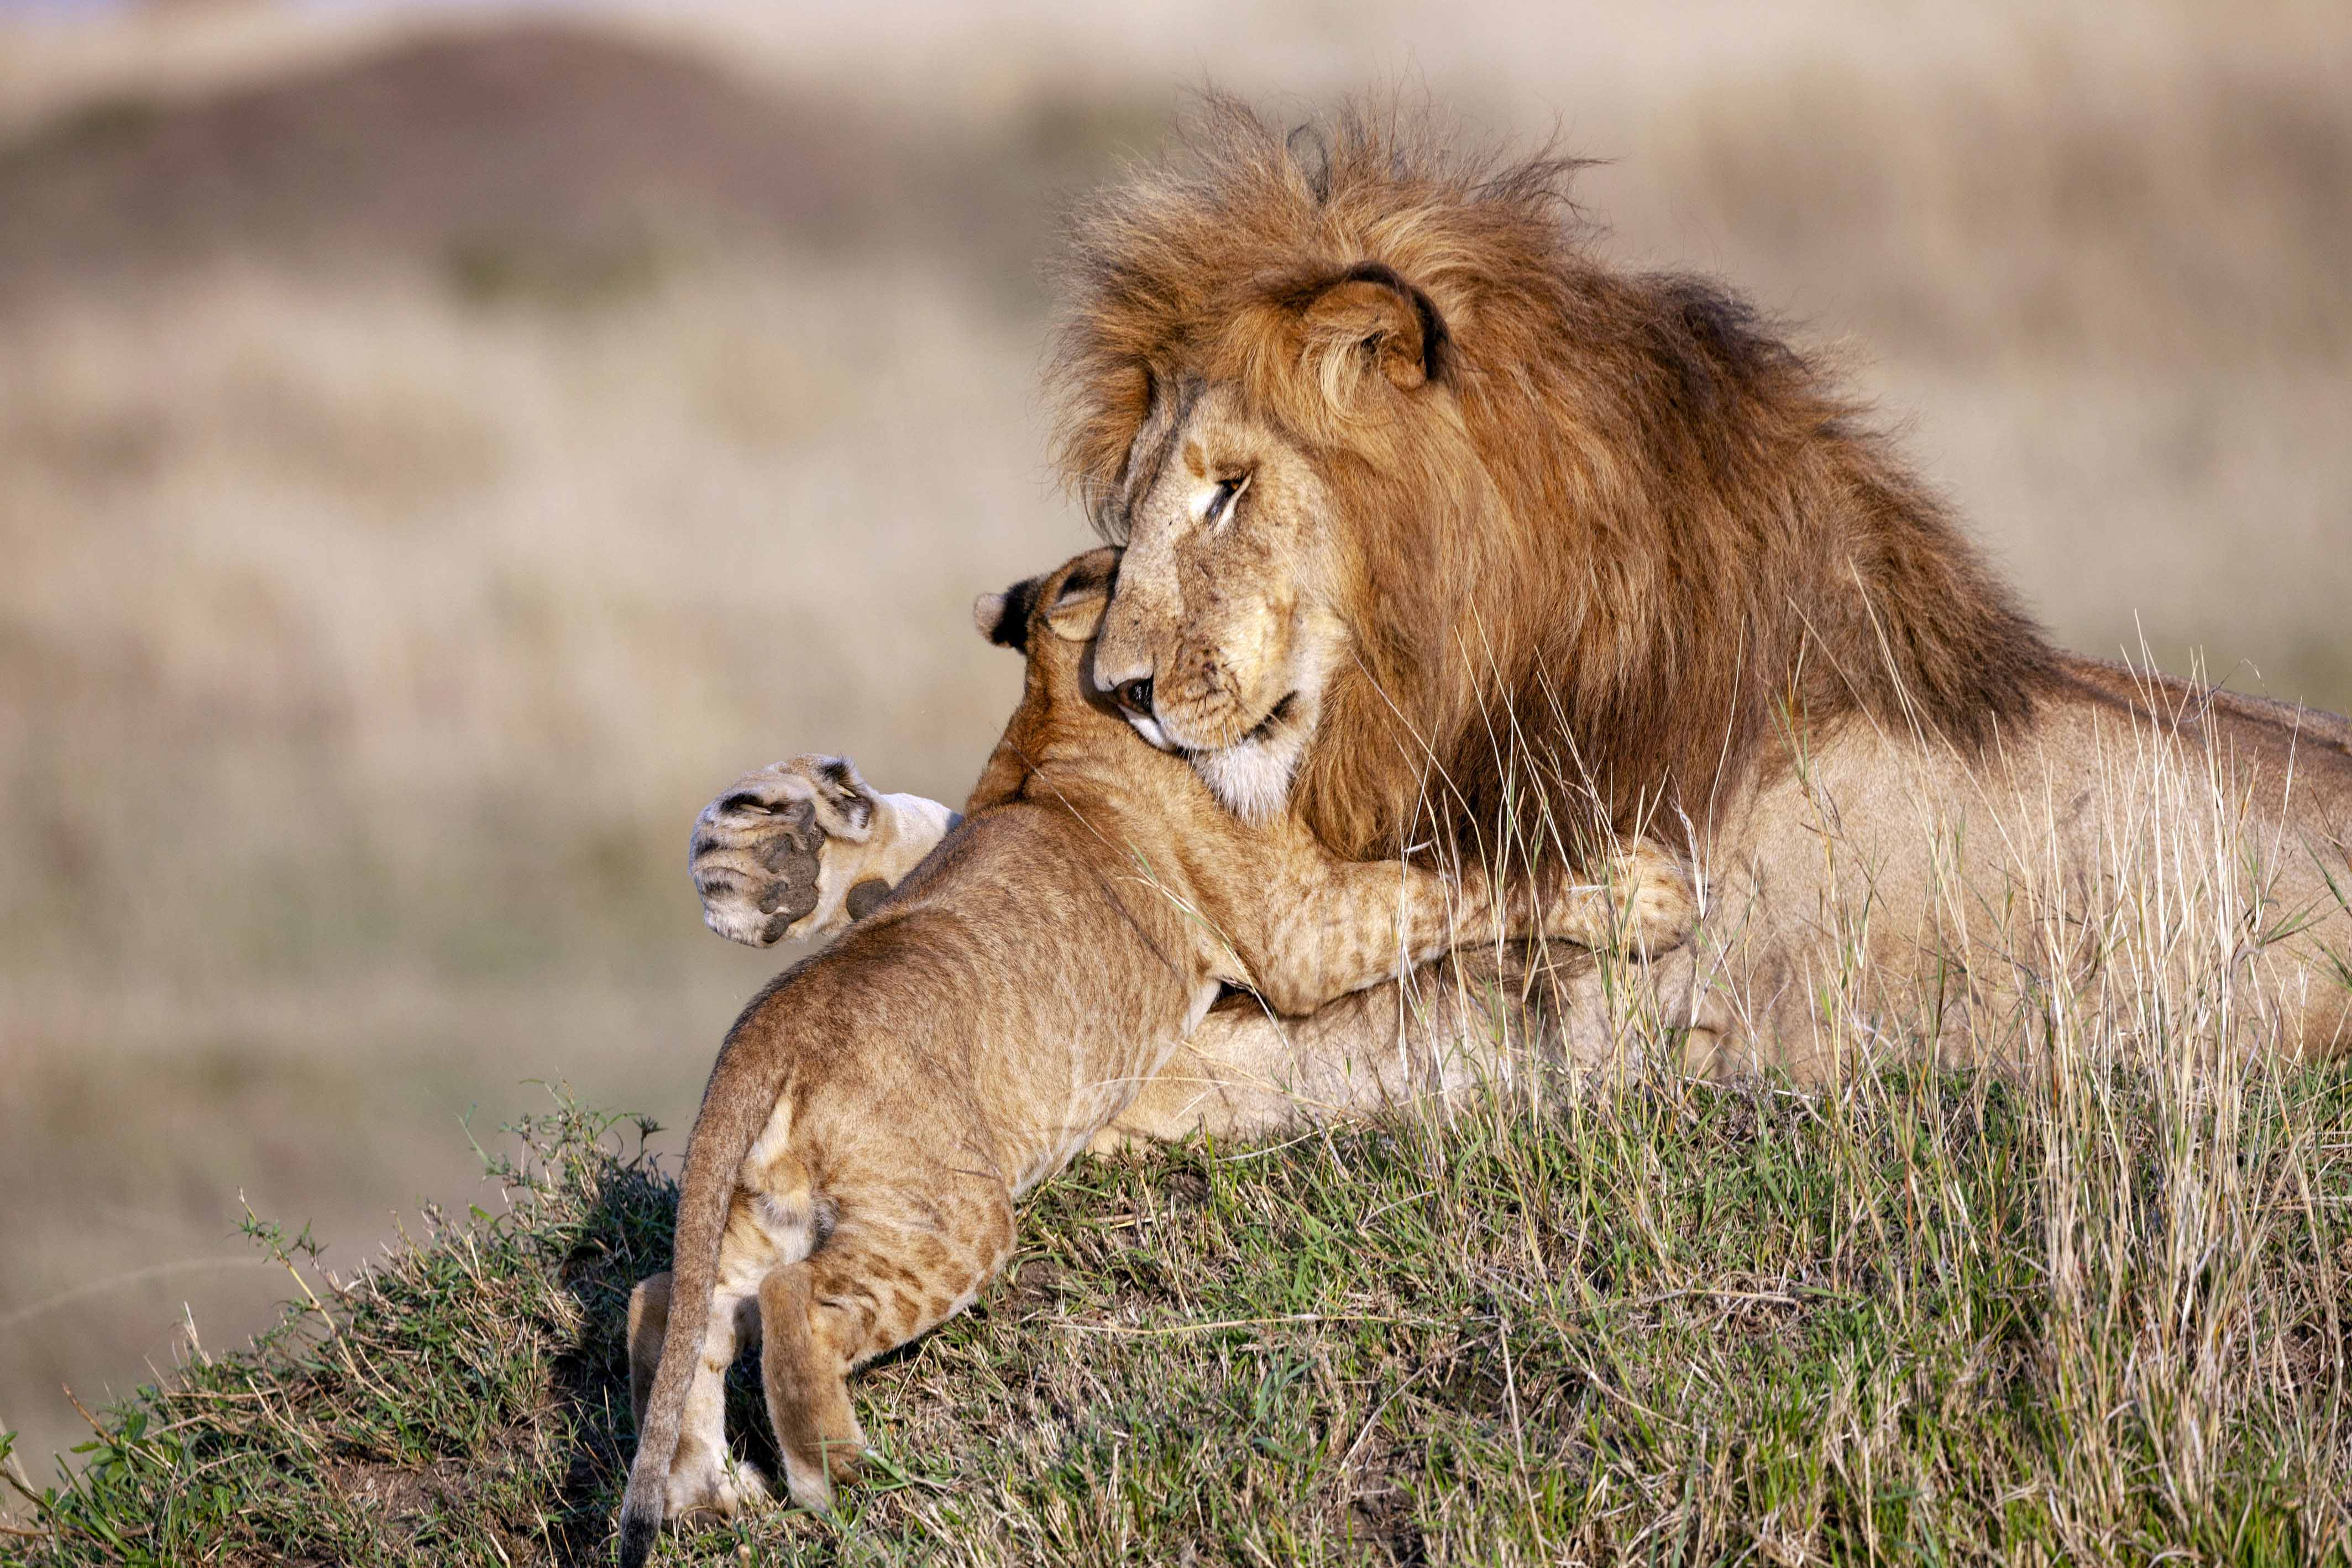 Heartwarming Photos of Lion Dad and Cub Embracing Reveal Gentle Side of King of the Savanna | The Epoch Times